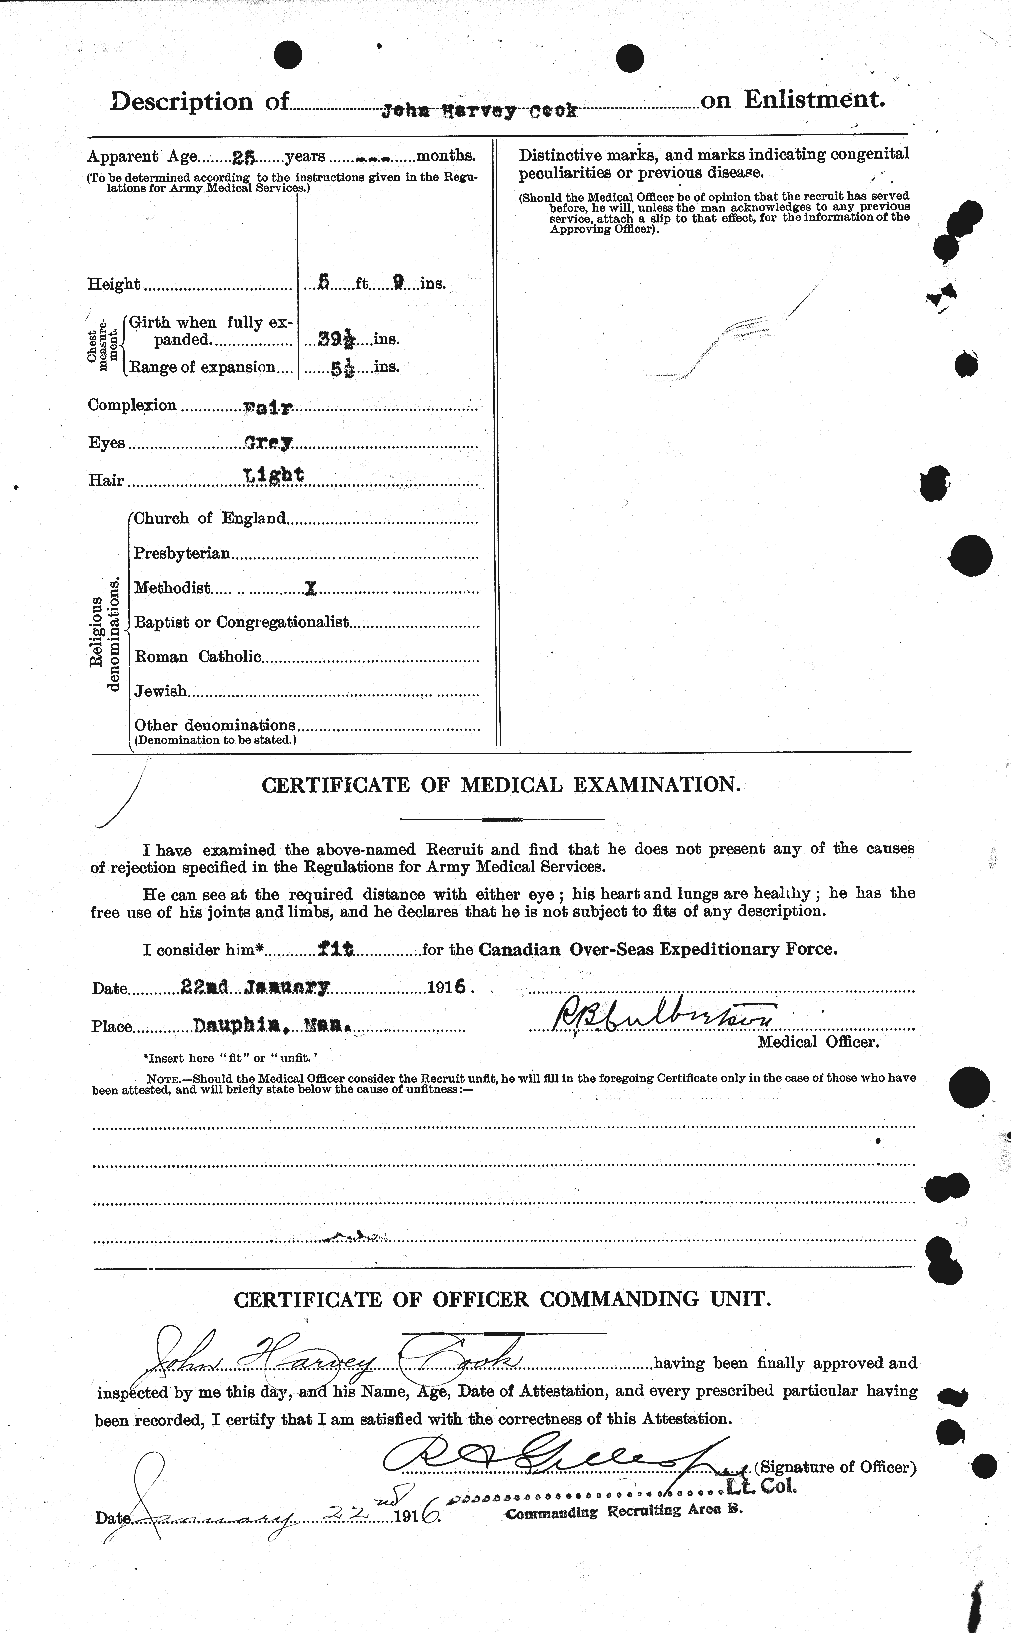 Personnel Records of the First World War - CEF 075541b